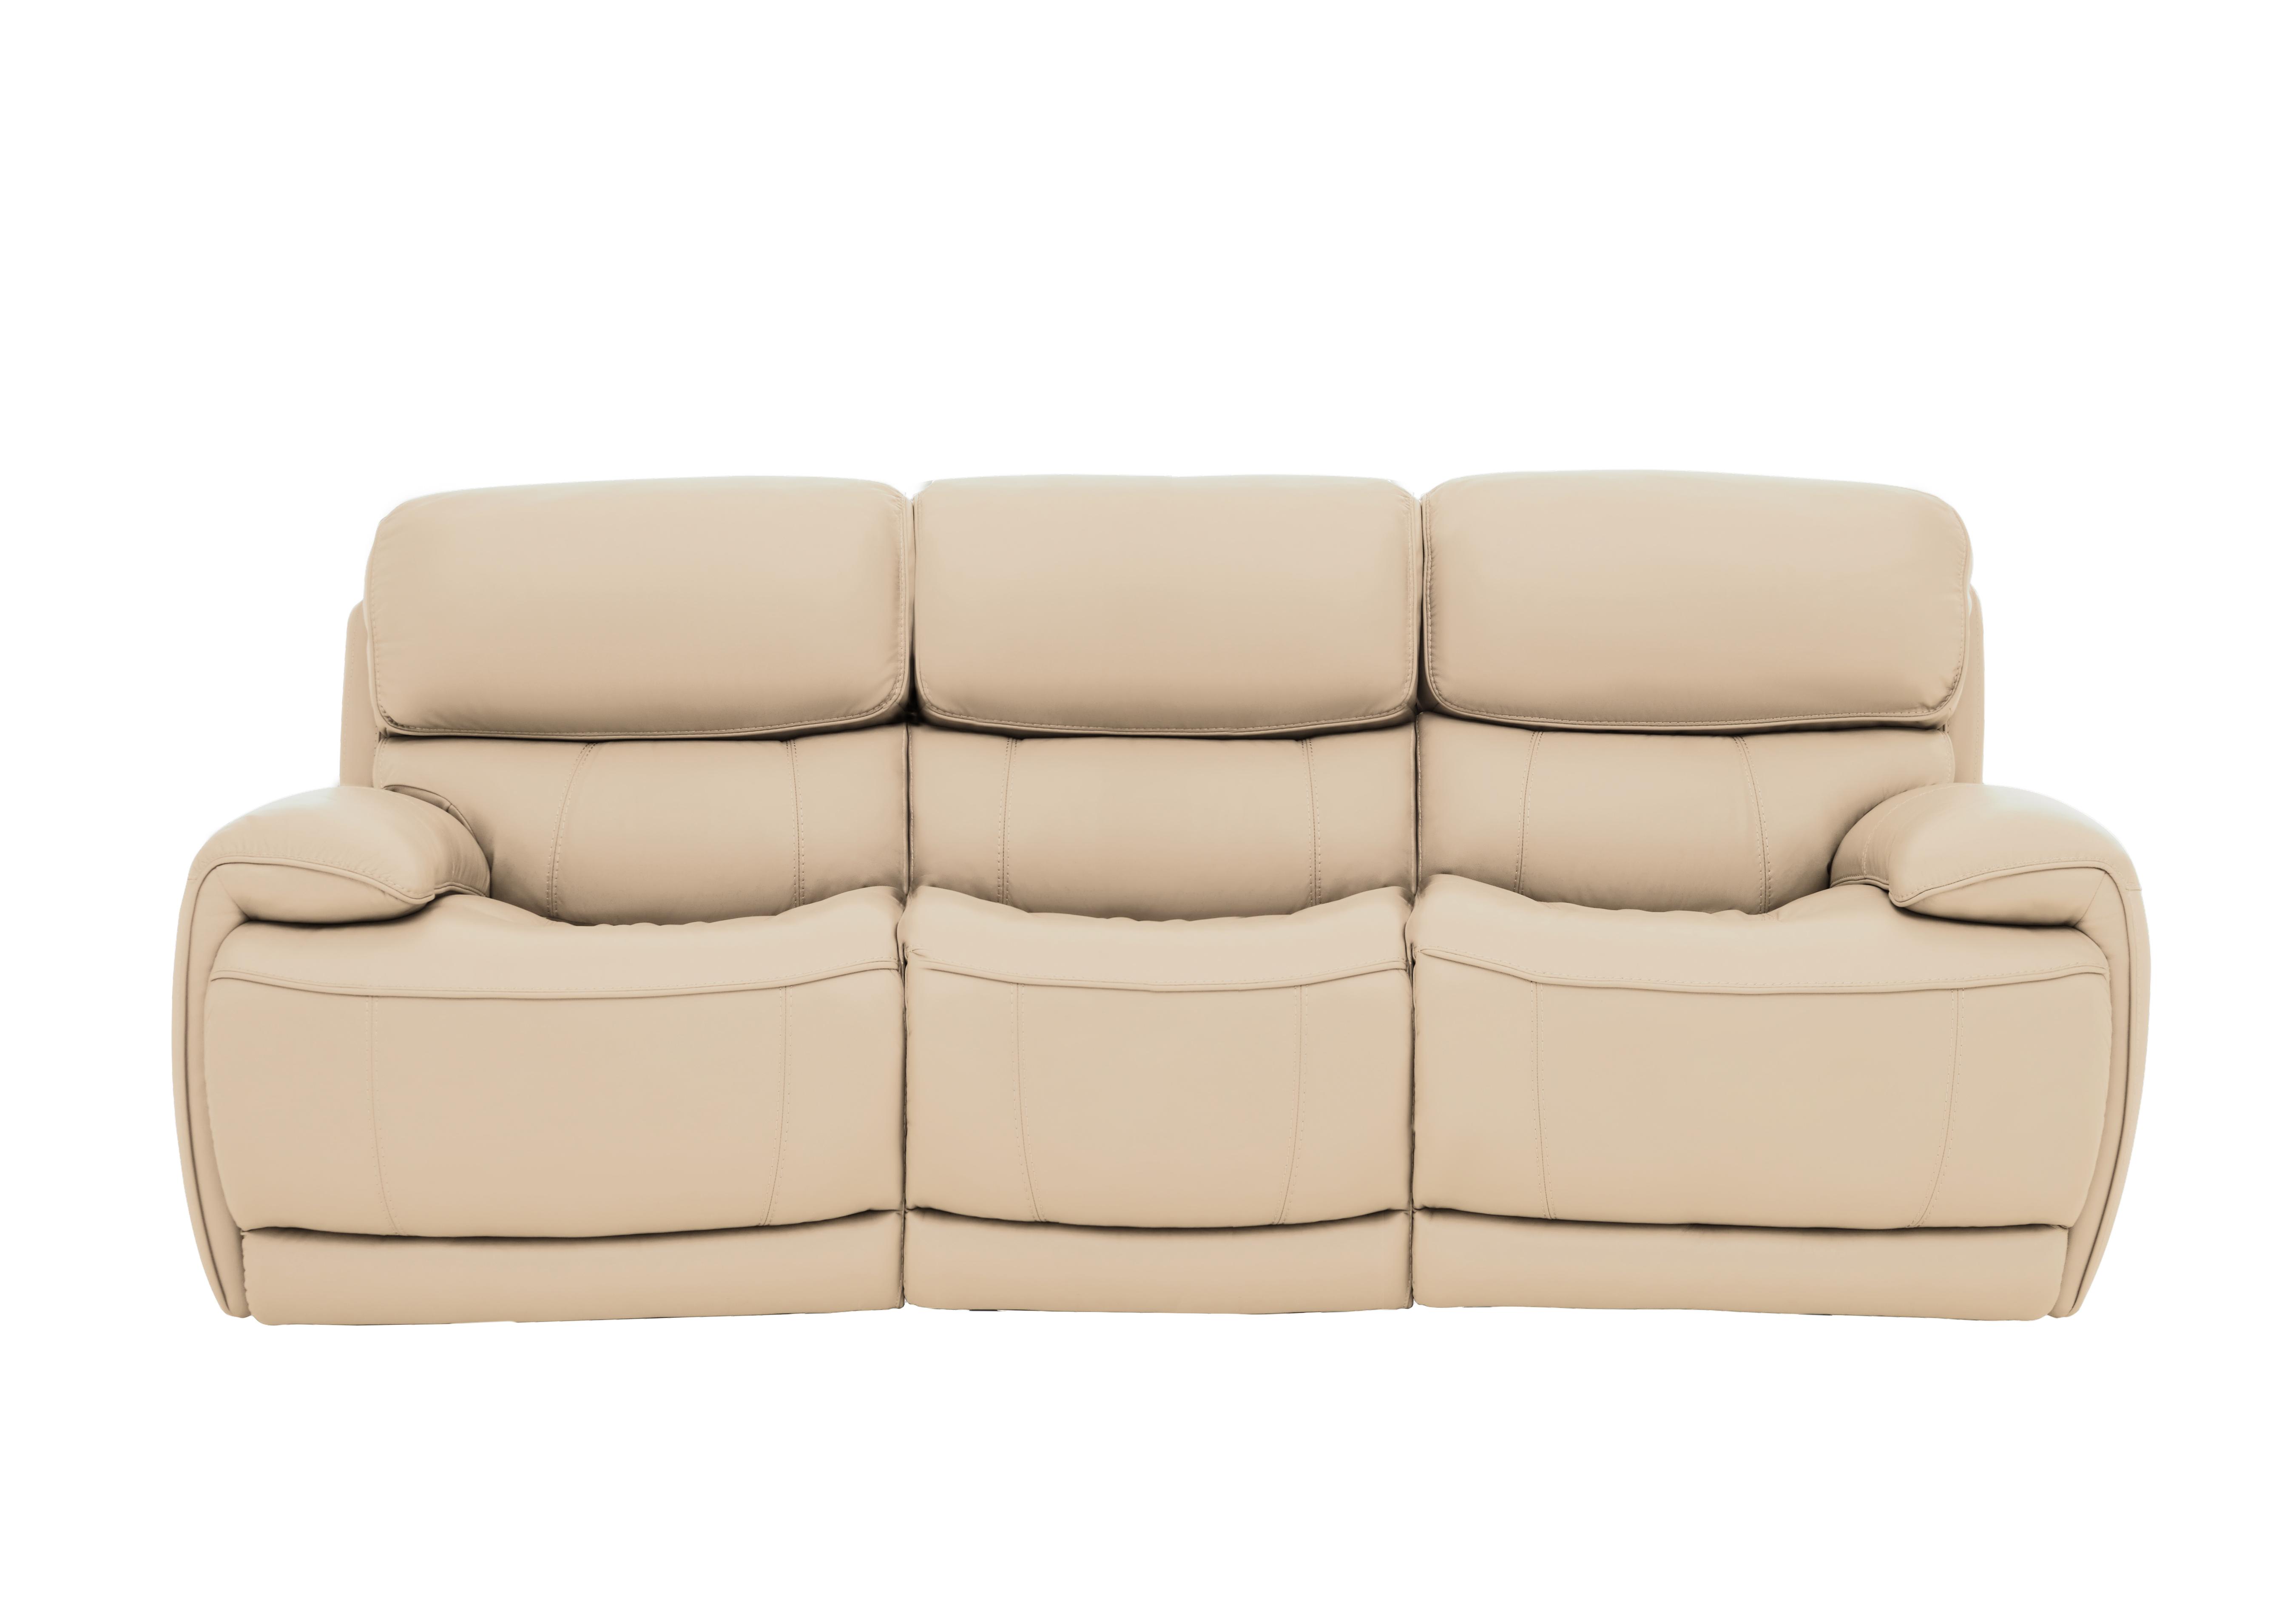 Rocco 3 Seater Leather Power Rocker Sofa with Power Headrests in Bv-862c Bisque on Furniture Village